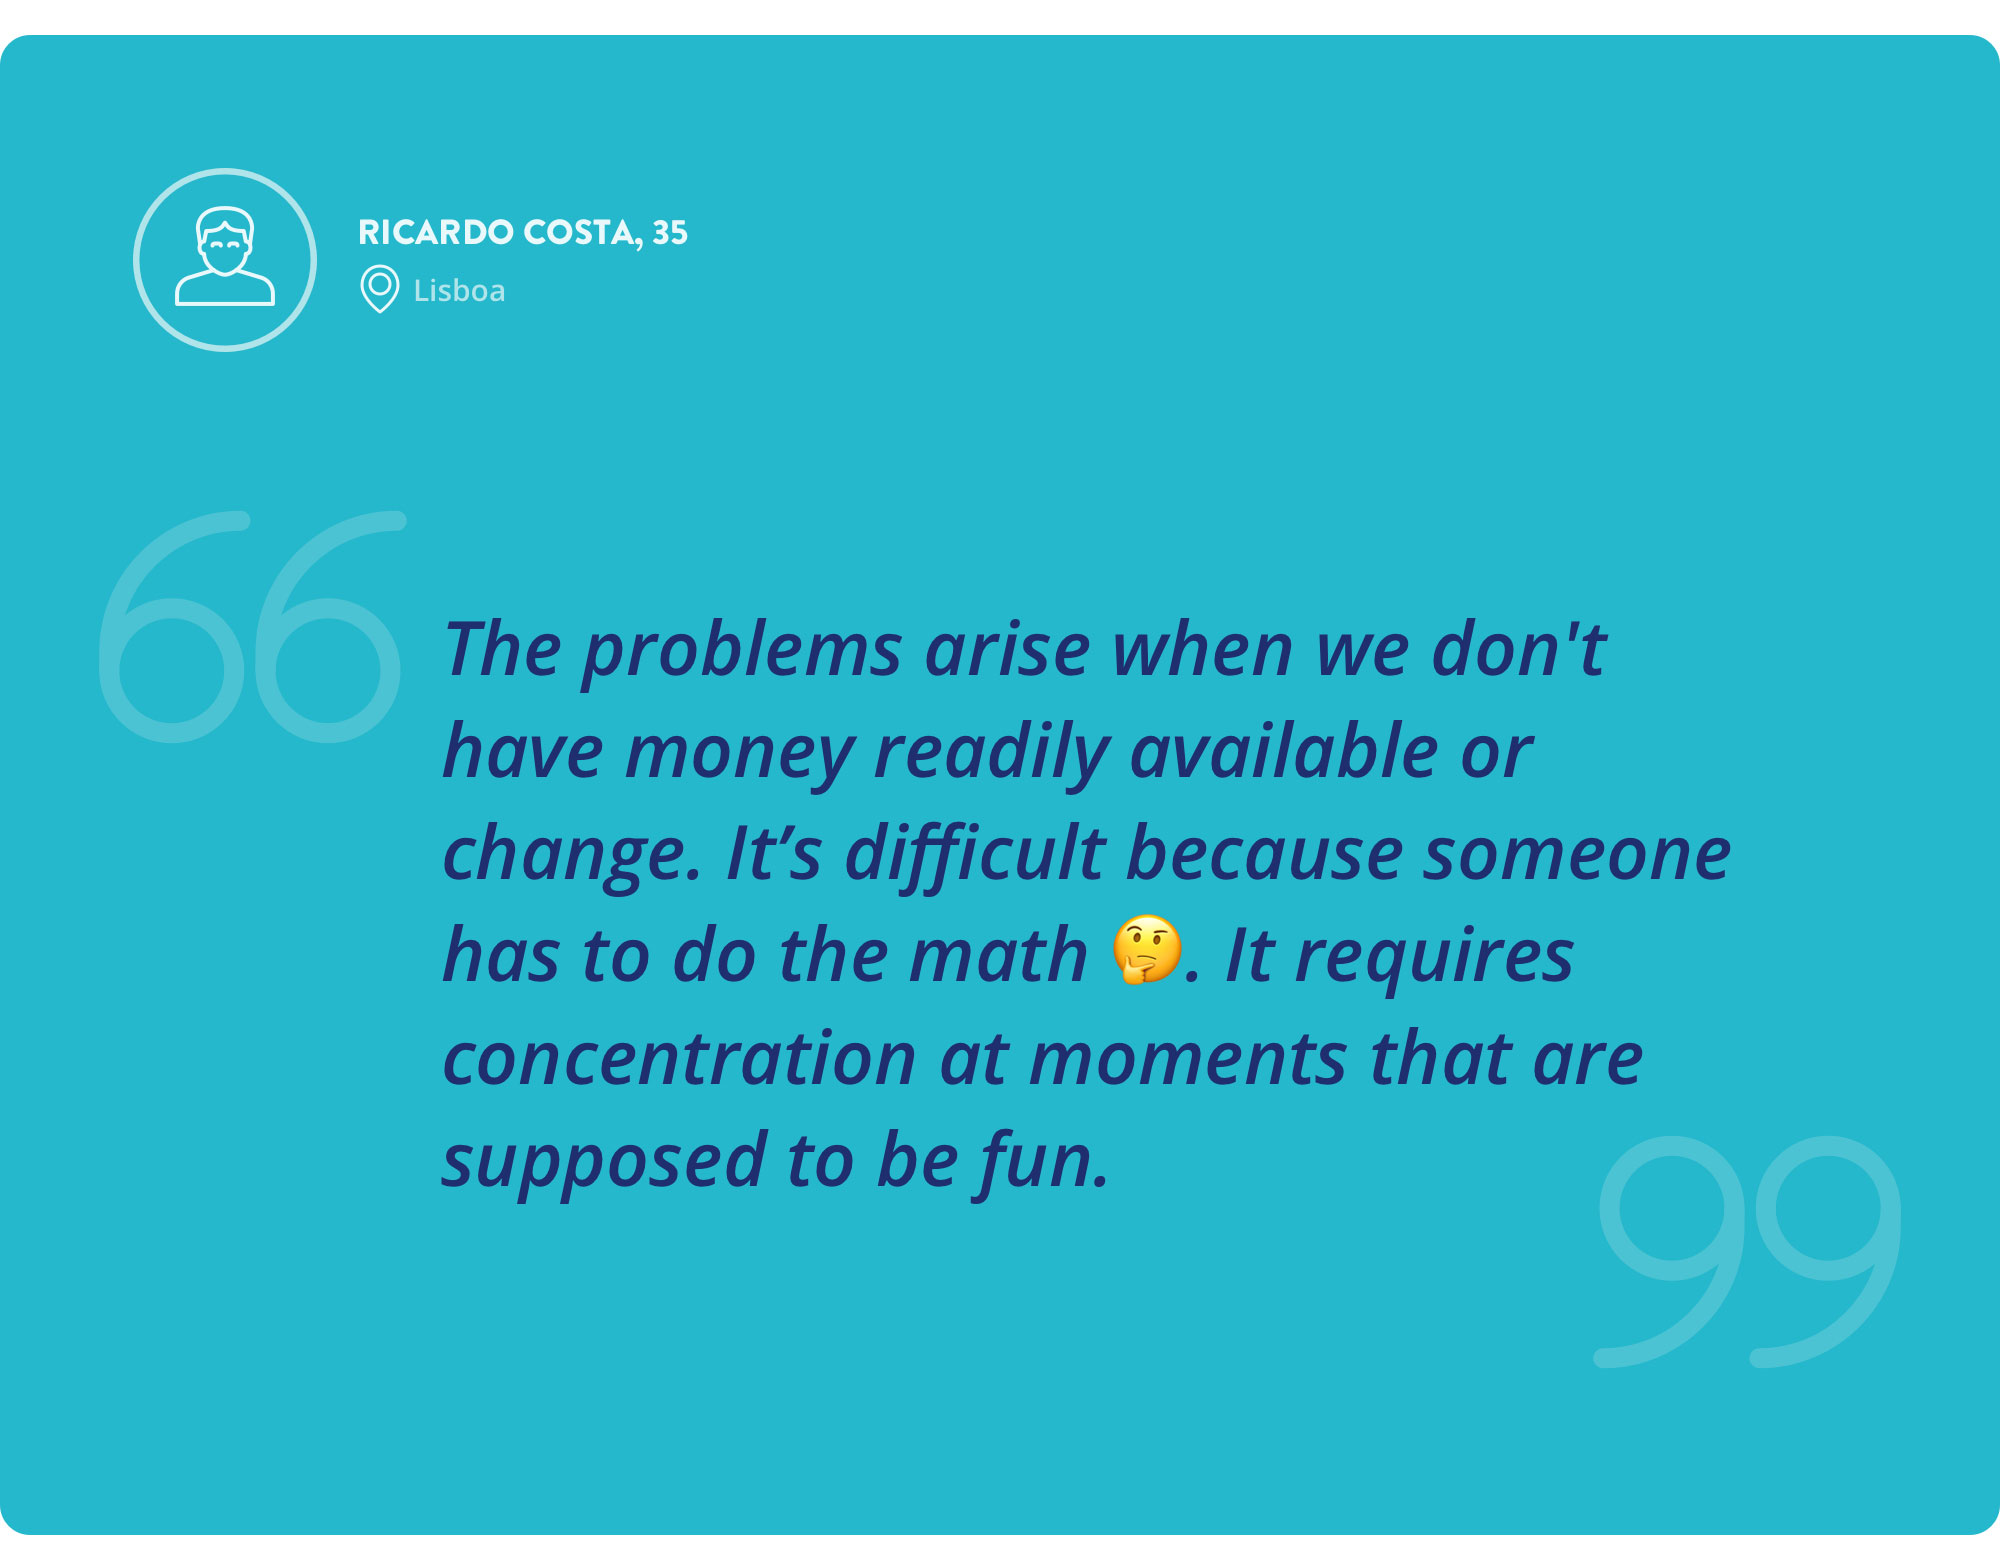 Interview quote by Ricardo Costa, 35 years old — The problems arise when we don't have money readily available or change. It’s difficult because someone has to do the math. It requires concentration at moments that are supposed to be fun.